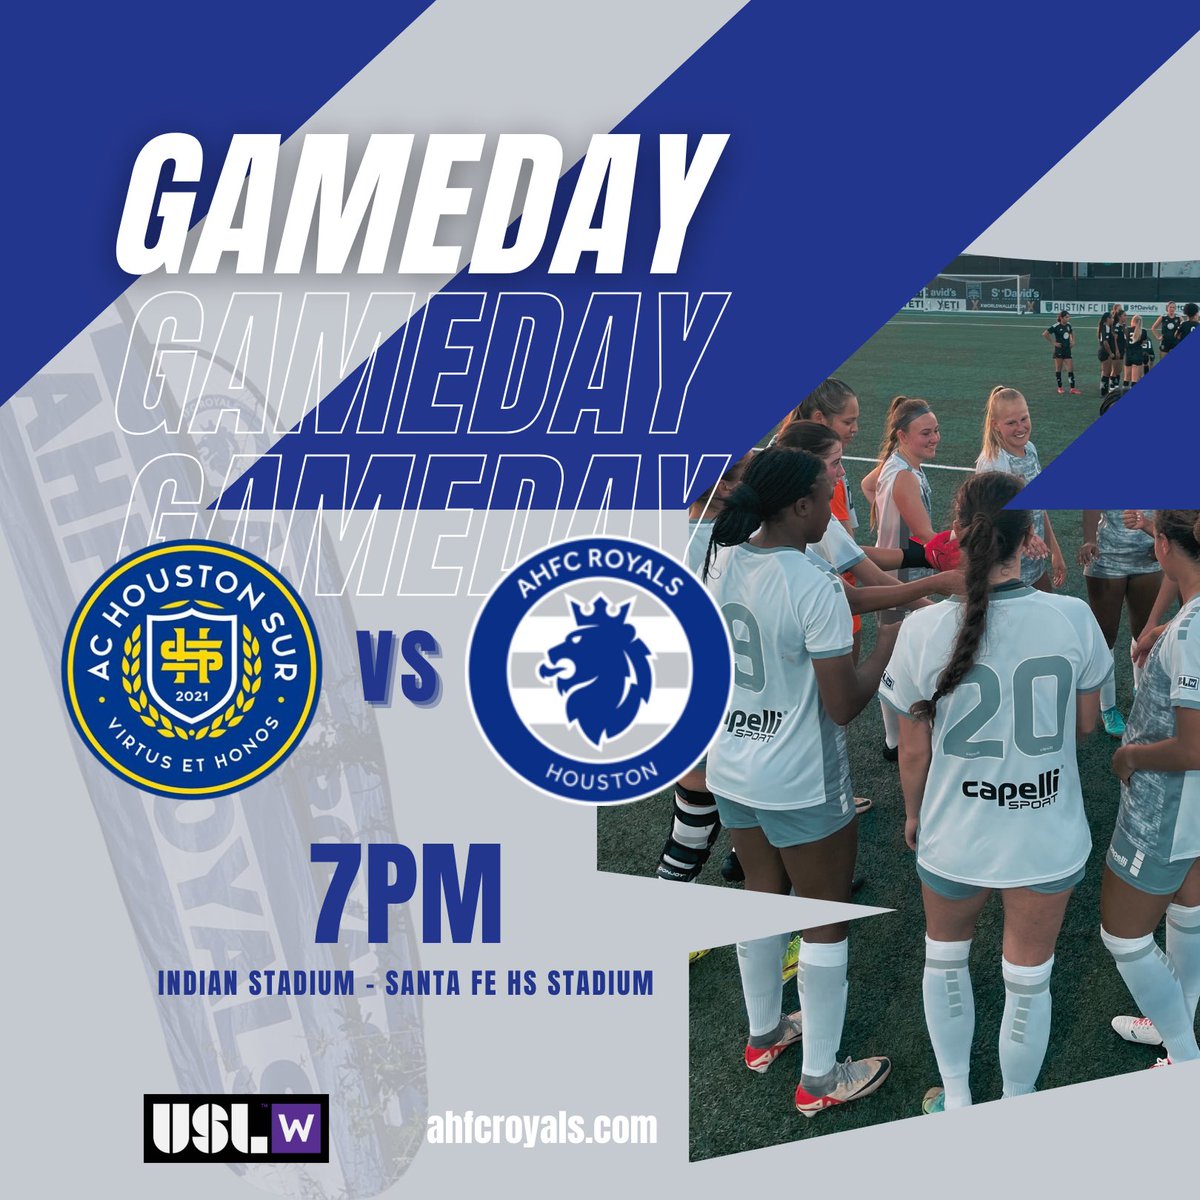 It’s game day for the Royals Women who face @HTxSur on the road tonight in the @USLWLeague! Kickoff is at 7pm, and the streaming will be available closer to game time. #ahfcpride